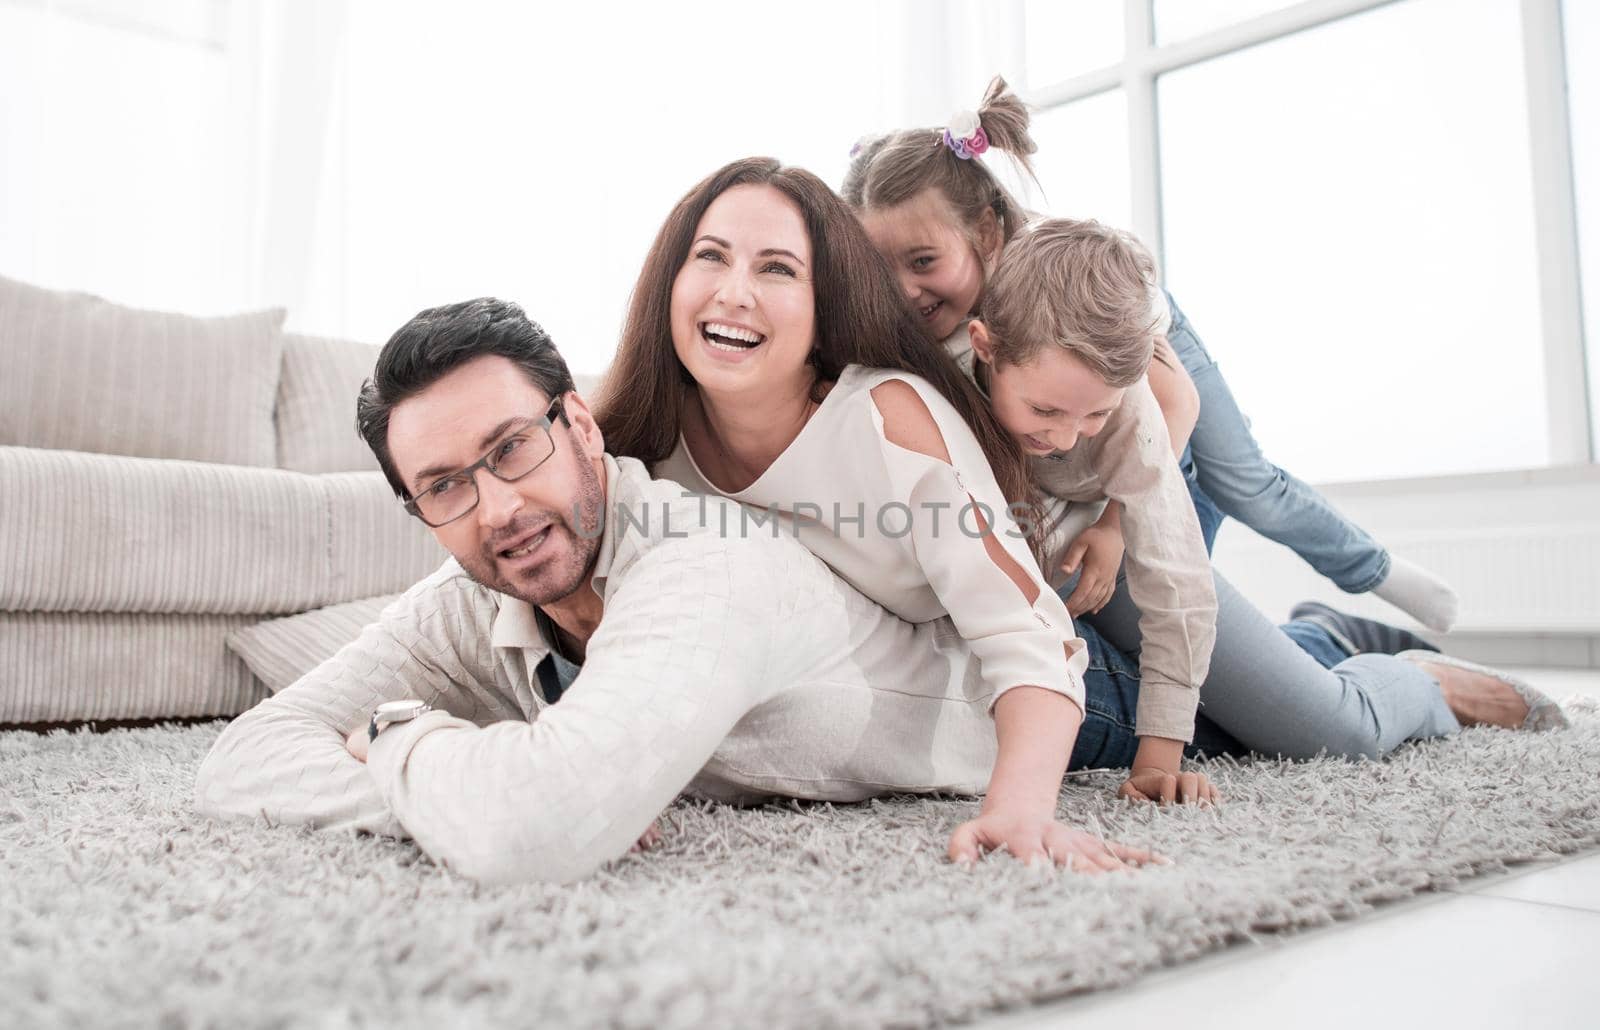 Happy family at home spending time together.photo with copy space